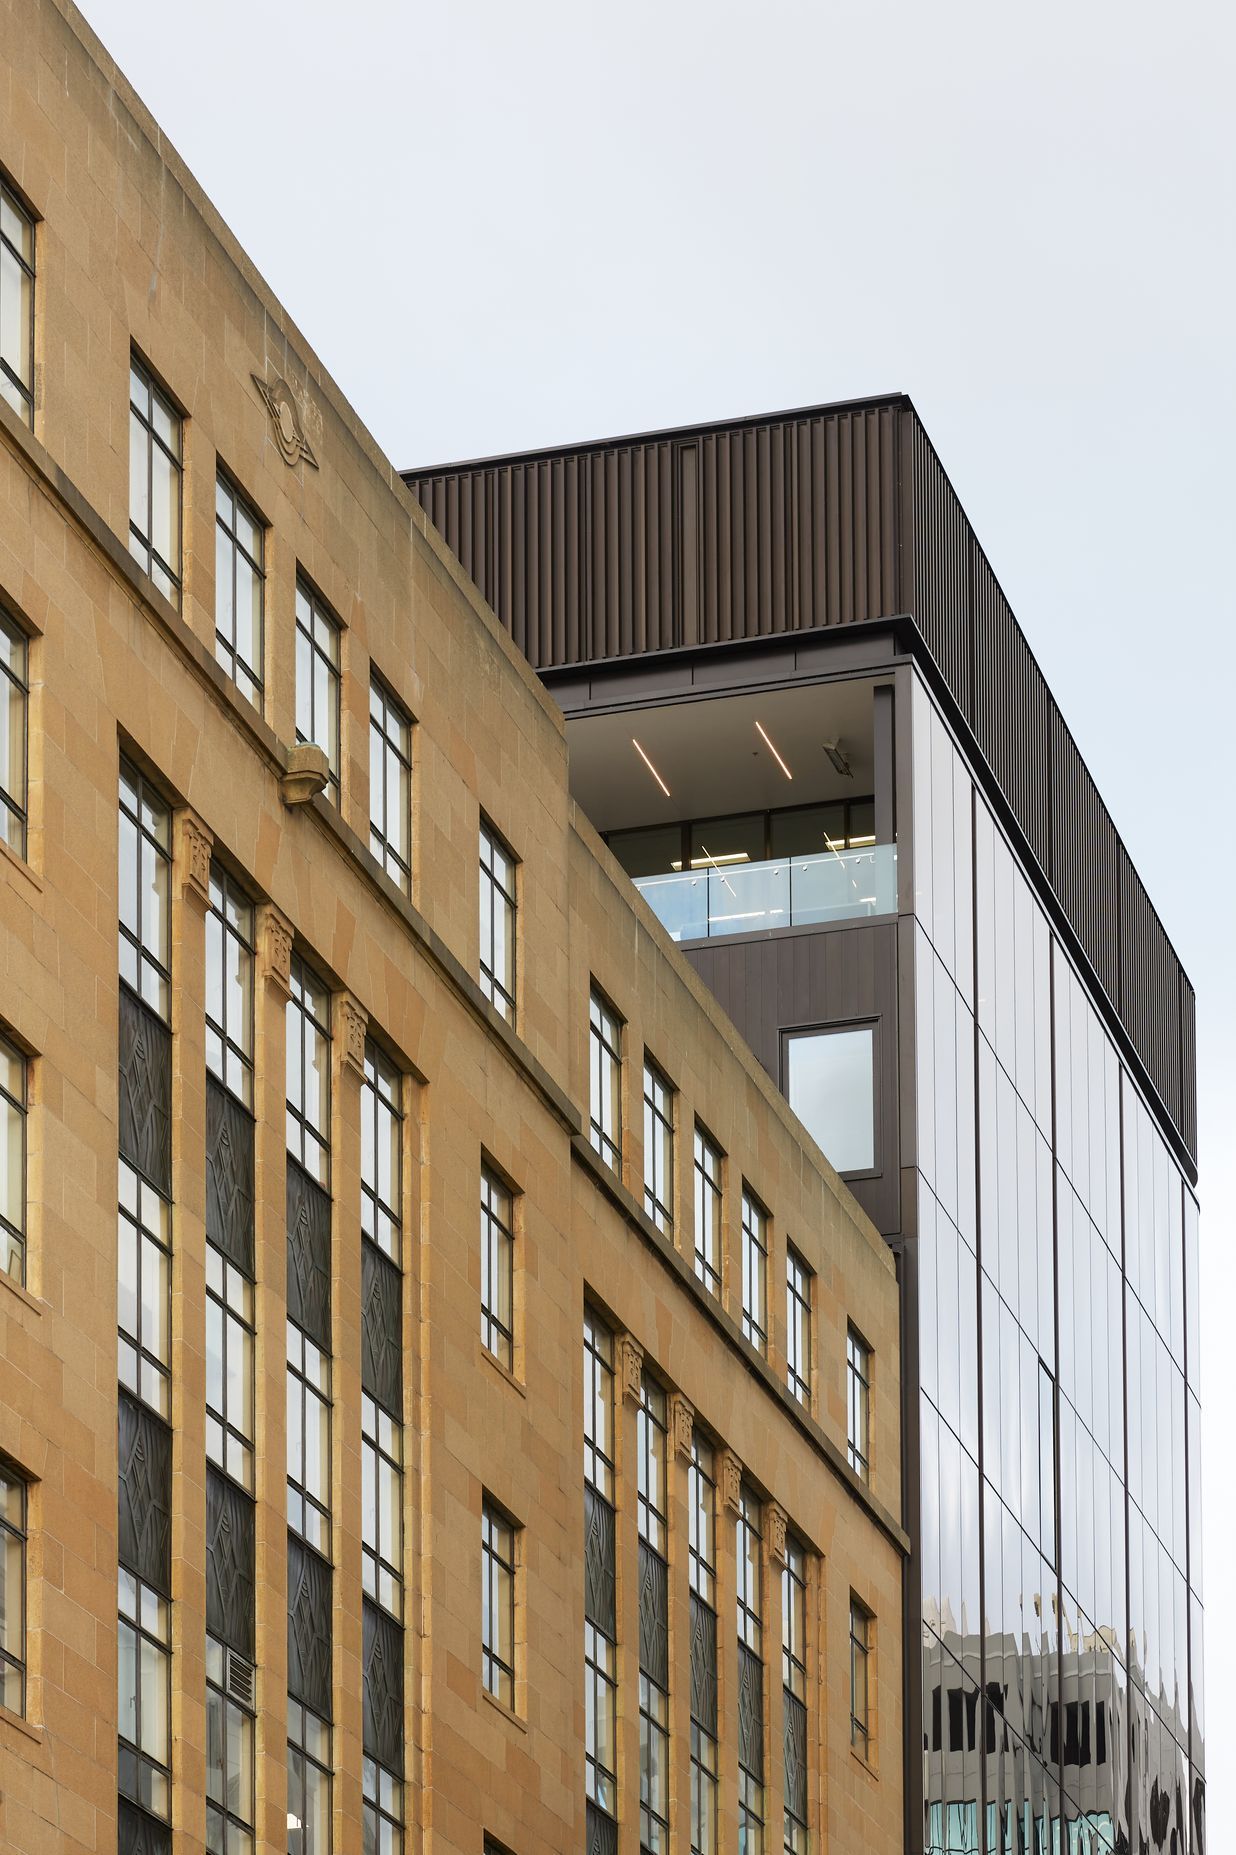 Finer detailing accentuates the building’s proportions. “There’s a 'cap' at the top of the building that’s a series of vertical fins. It was something our client quite liked and is very traditional on an office building,” says Marc.